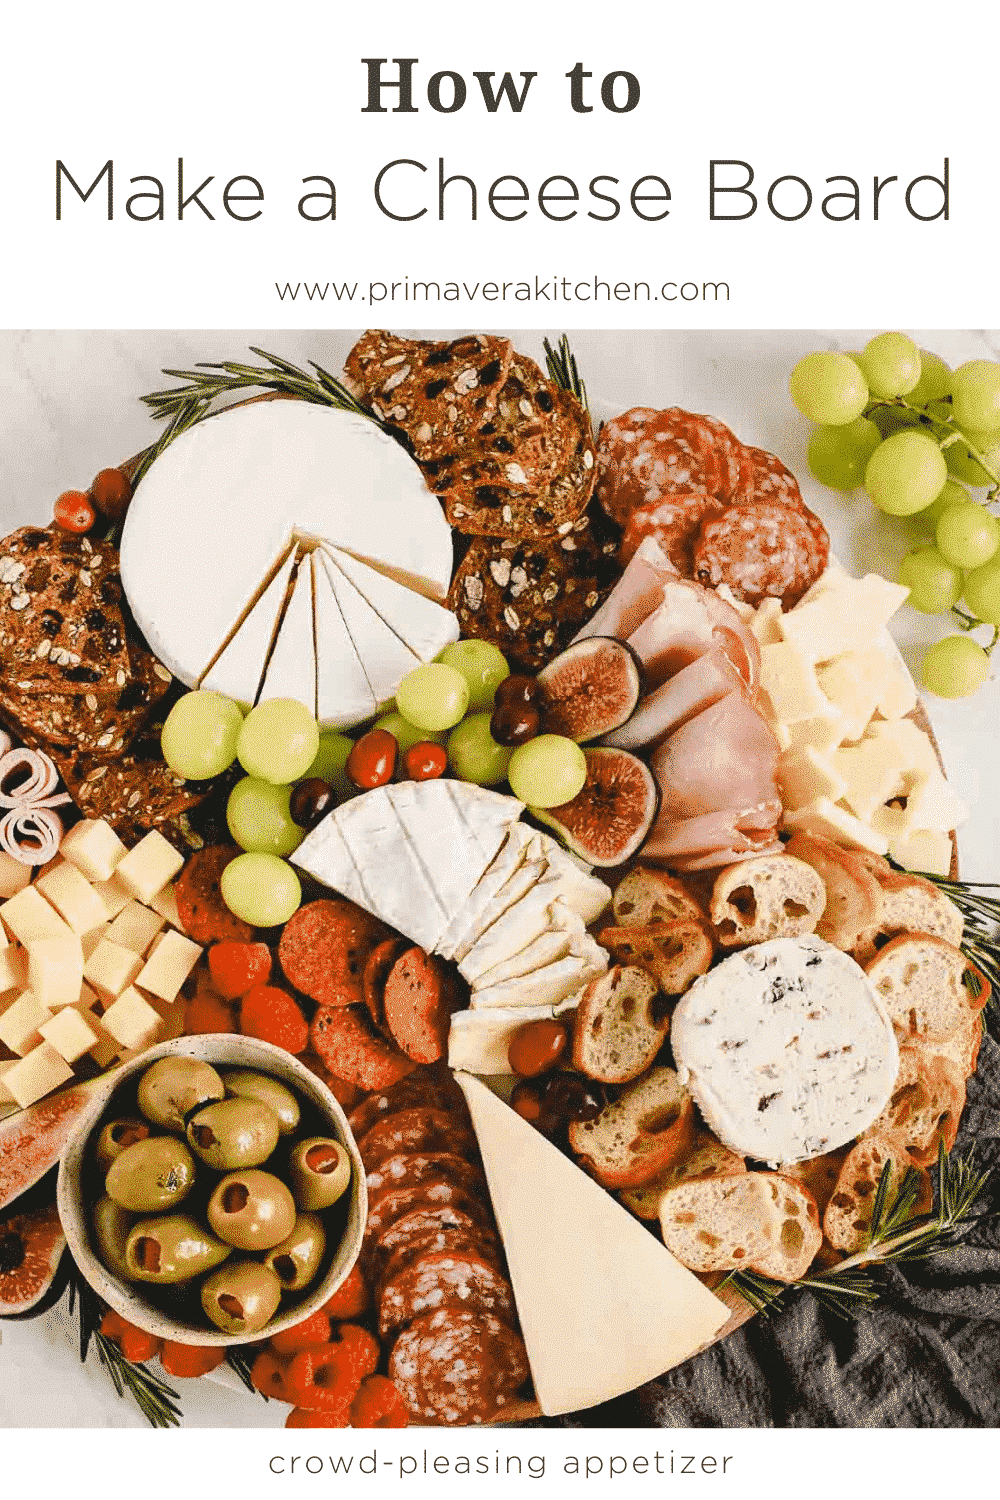 titled photo collage (and shown): How to Make a Cheese Board